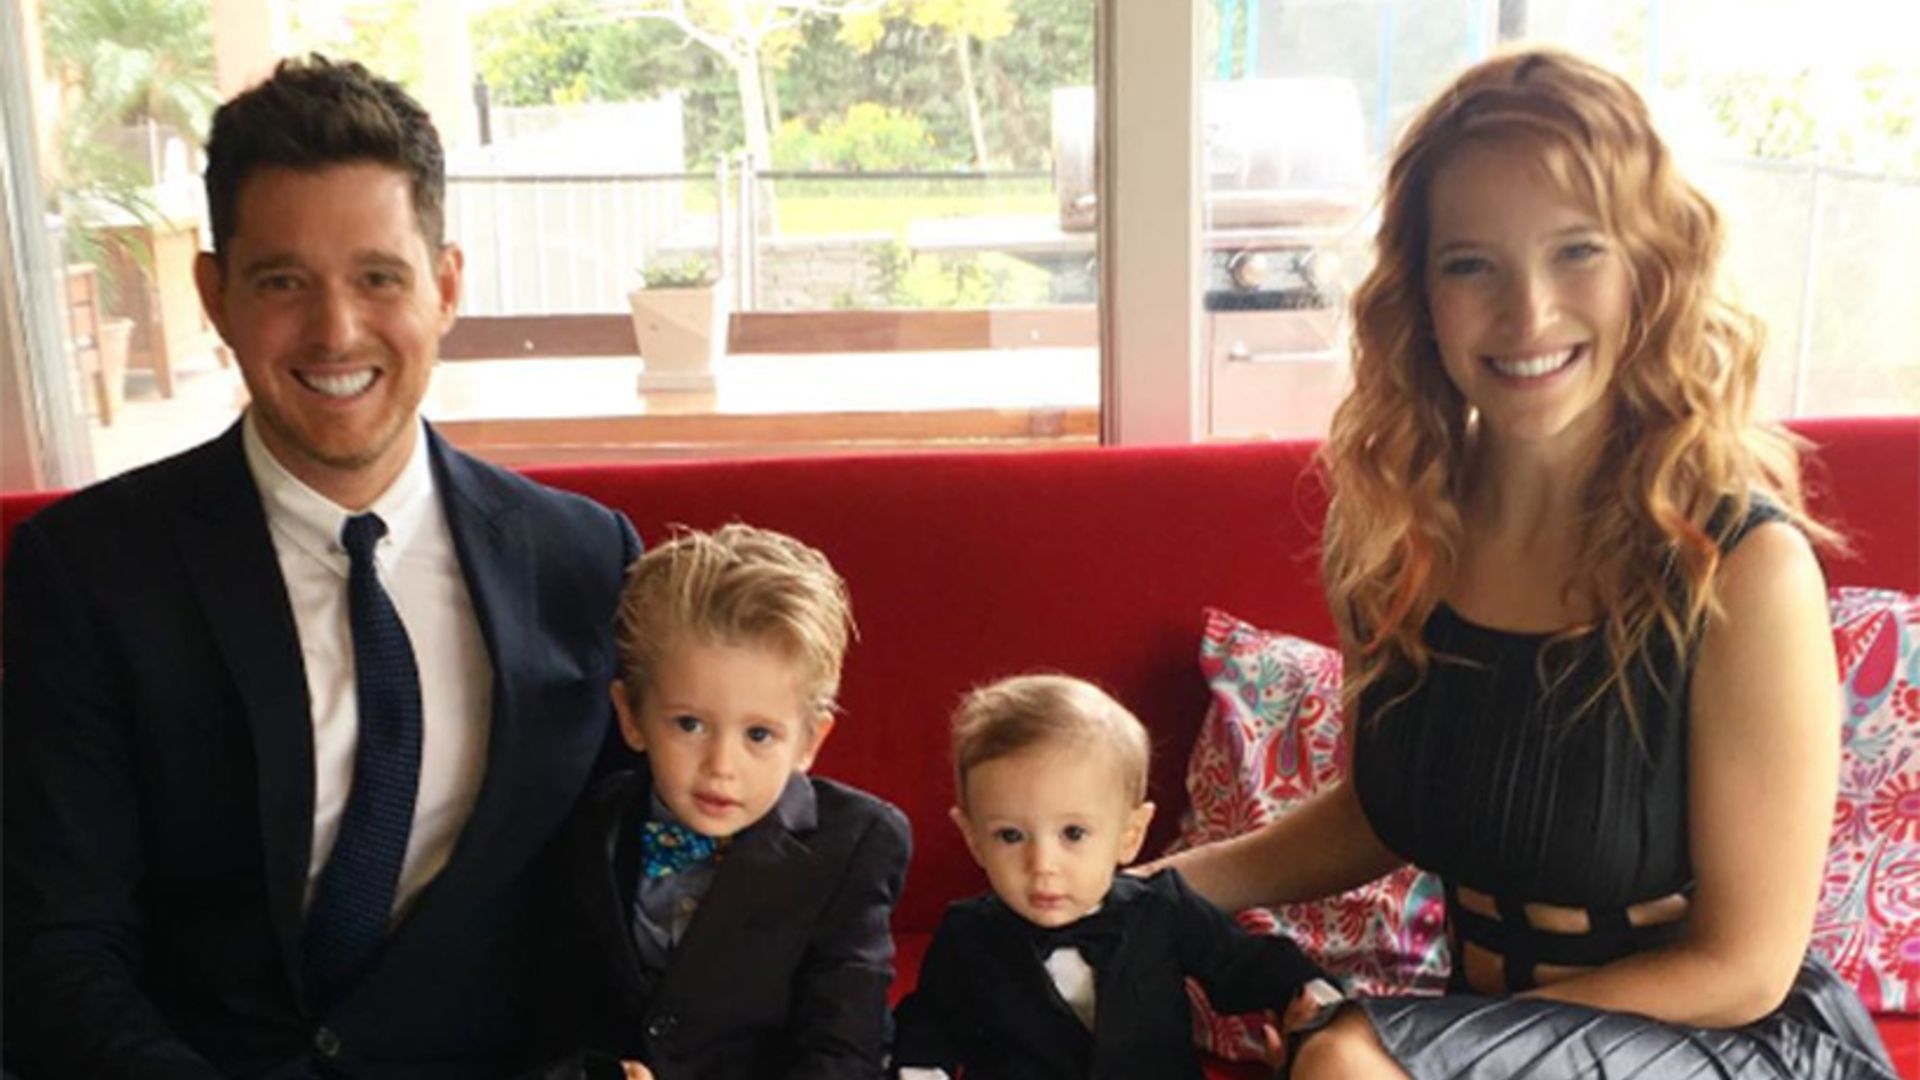 Michael Bublé's sister shares inspirational message as singer's son battles cancer